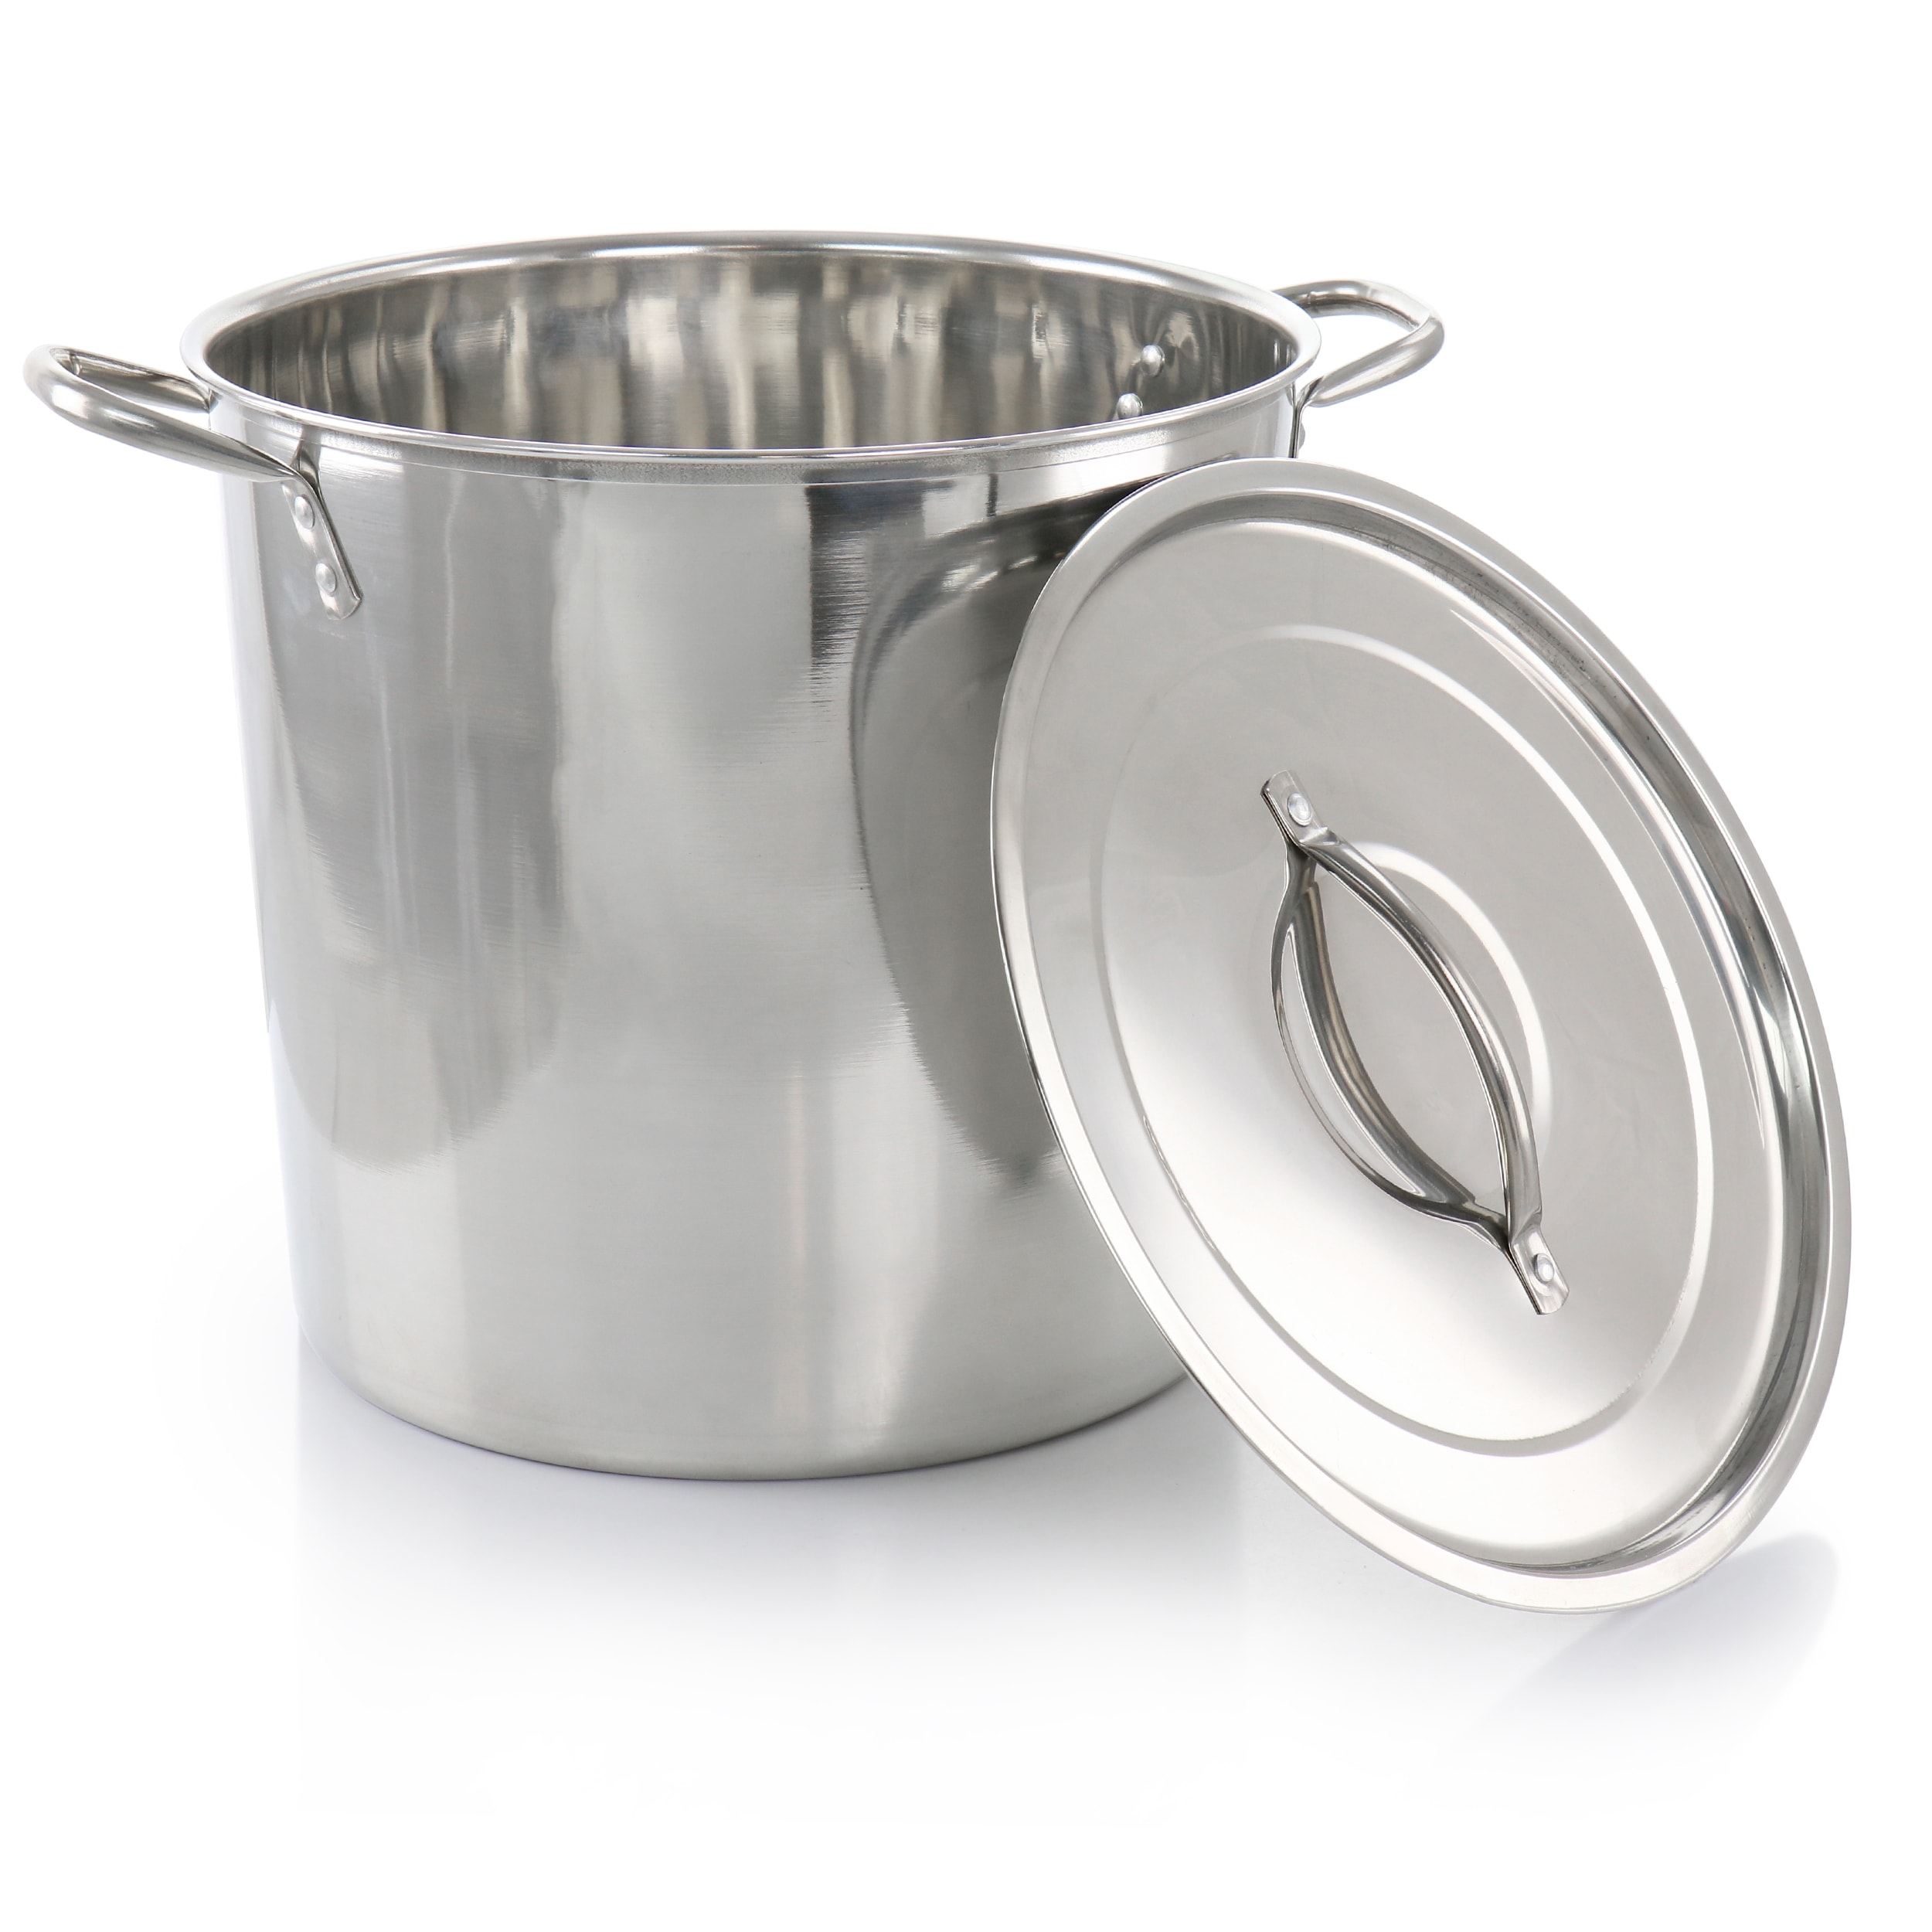 https://ak1.ostkcdn.com/images/products/is/images/direct/89f5df44d260b540794e01bf797454bce9eaadeb/Gibson-Everyday-Whittington-16-Quart-Stainless-Steel-Stock-Pot-with-Lid.jpg